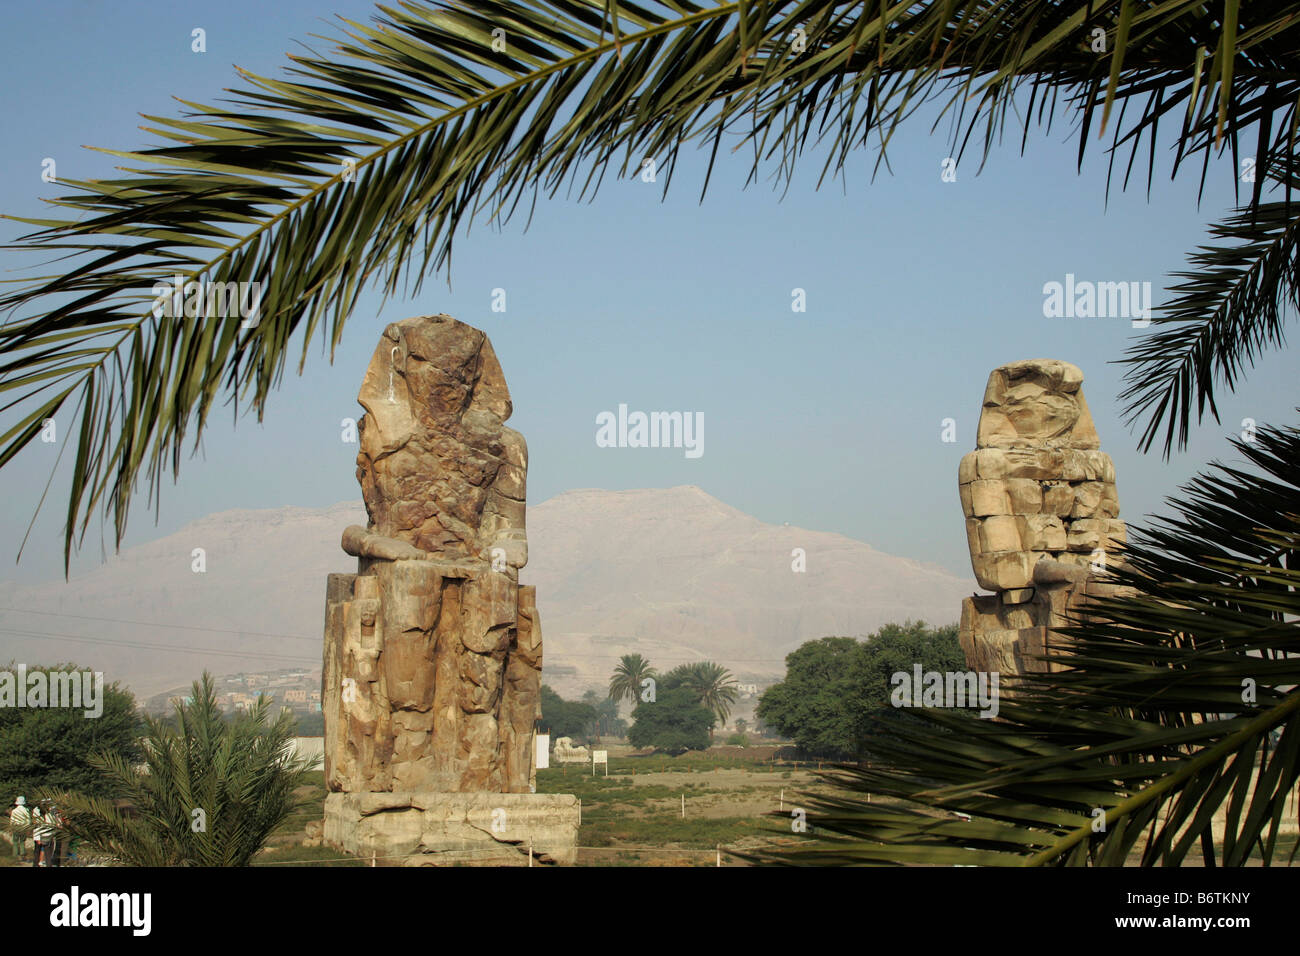 The Colossi of Memnon are two massive stone statues of Pharaoh Amenhotep III on the West Bank of the River Nile. Stock Photo